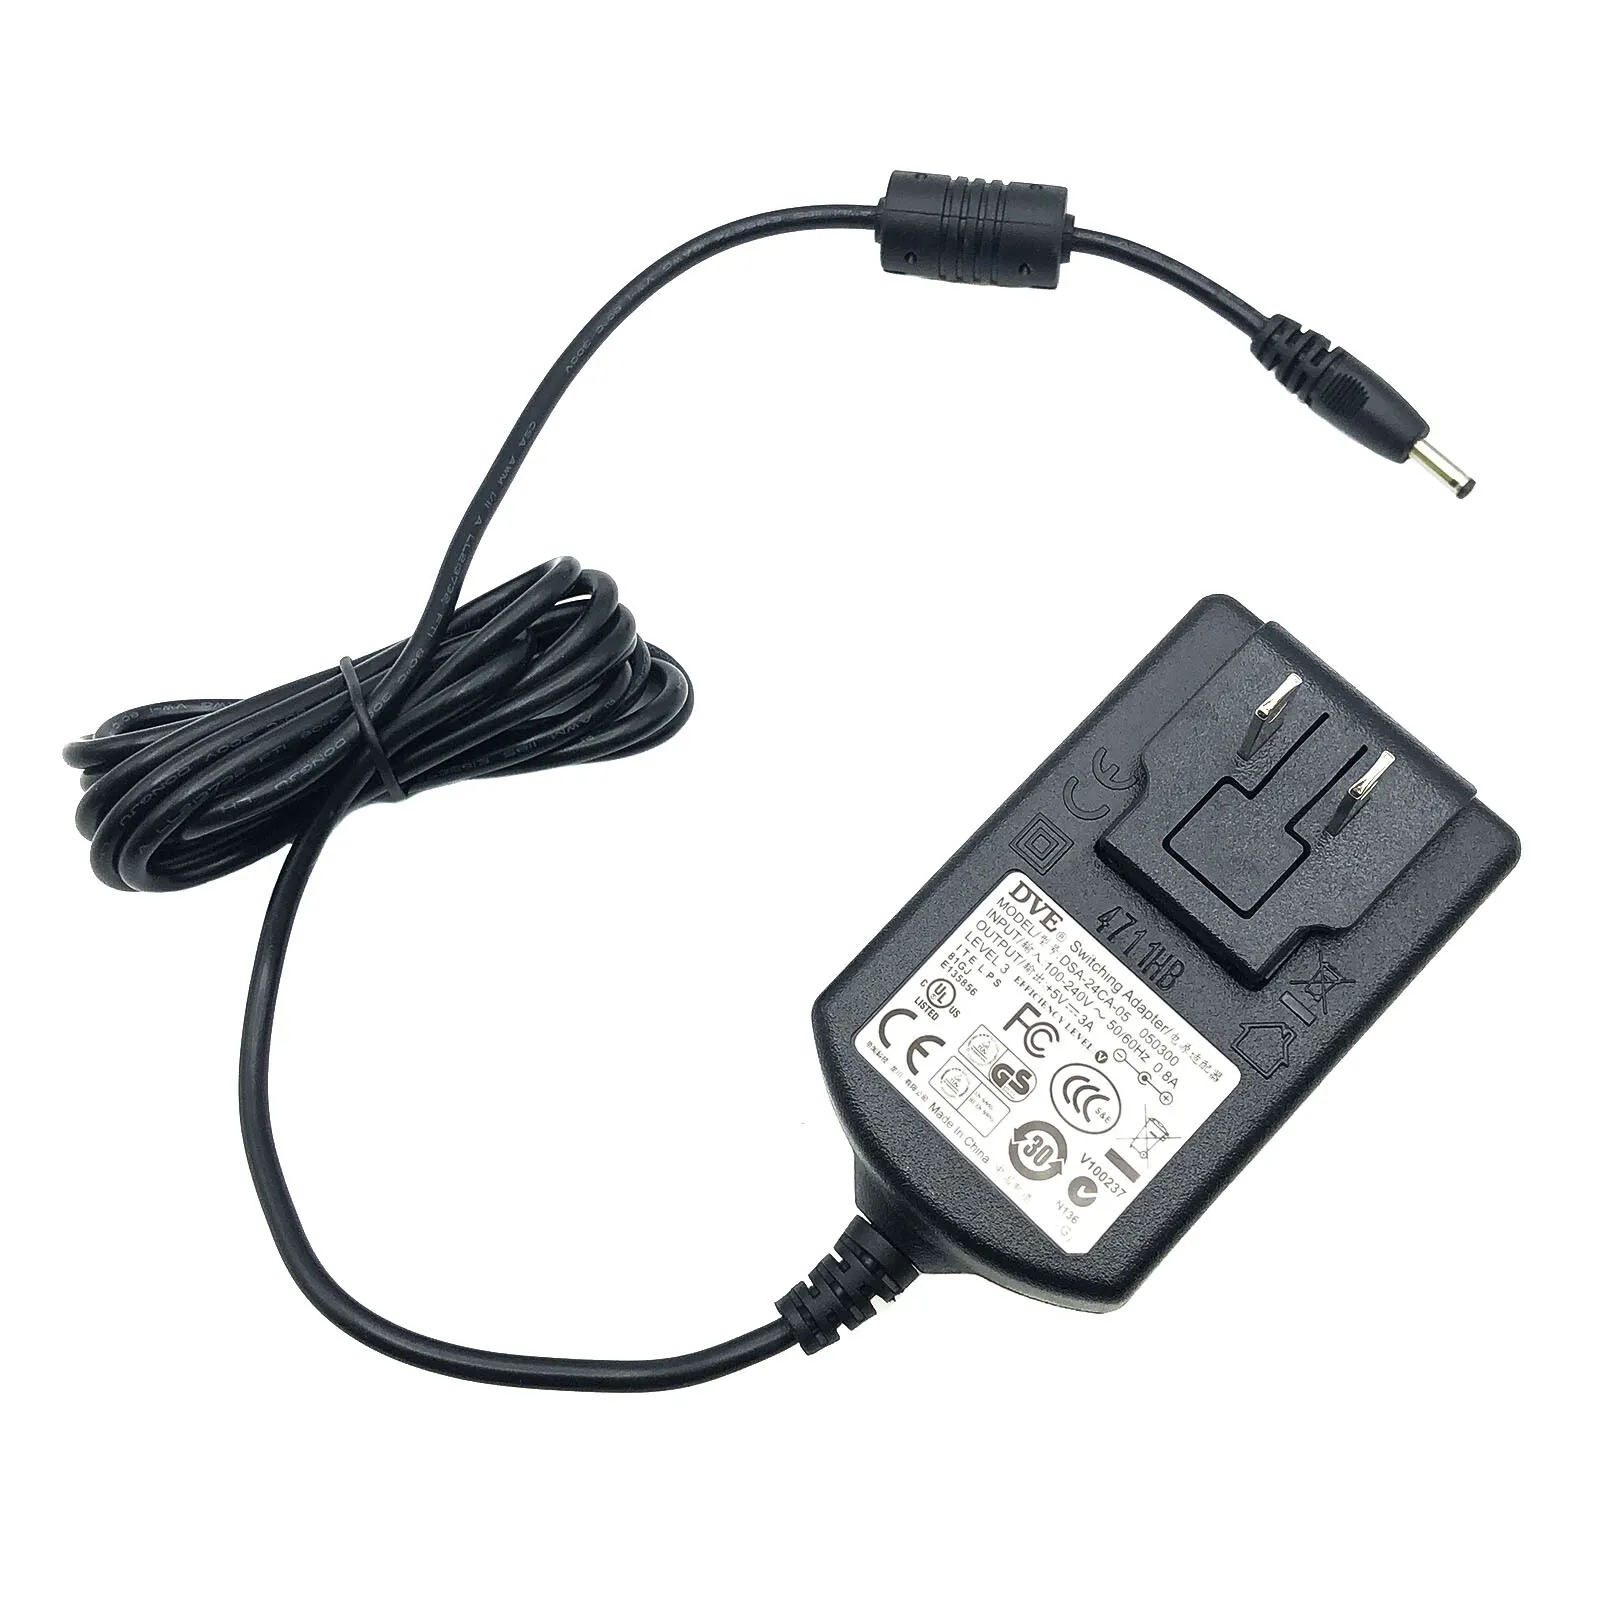 *Brand NEW*Genuine DVE +5V 3A 15W AC DC Wall Switching Adapter Model DSA-24CA-05 050300 Power Supply